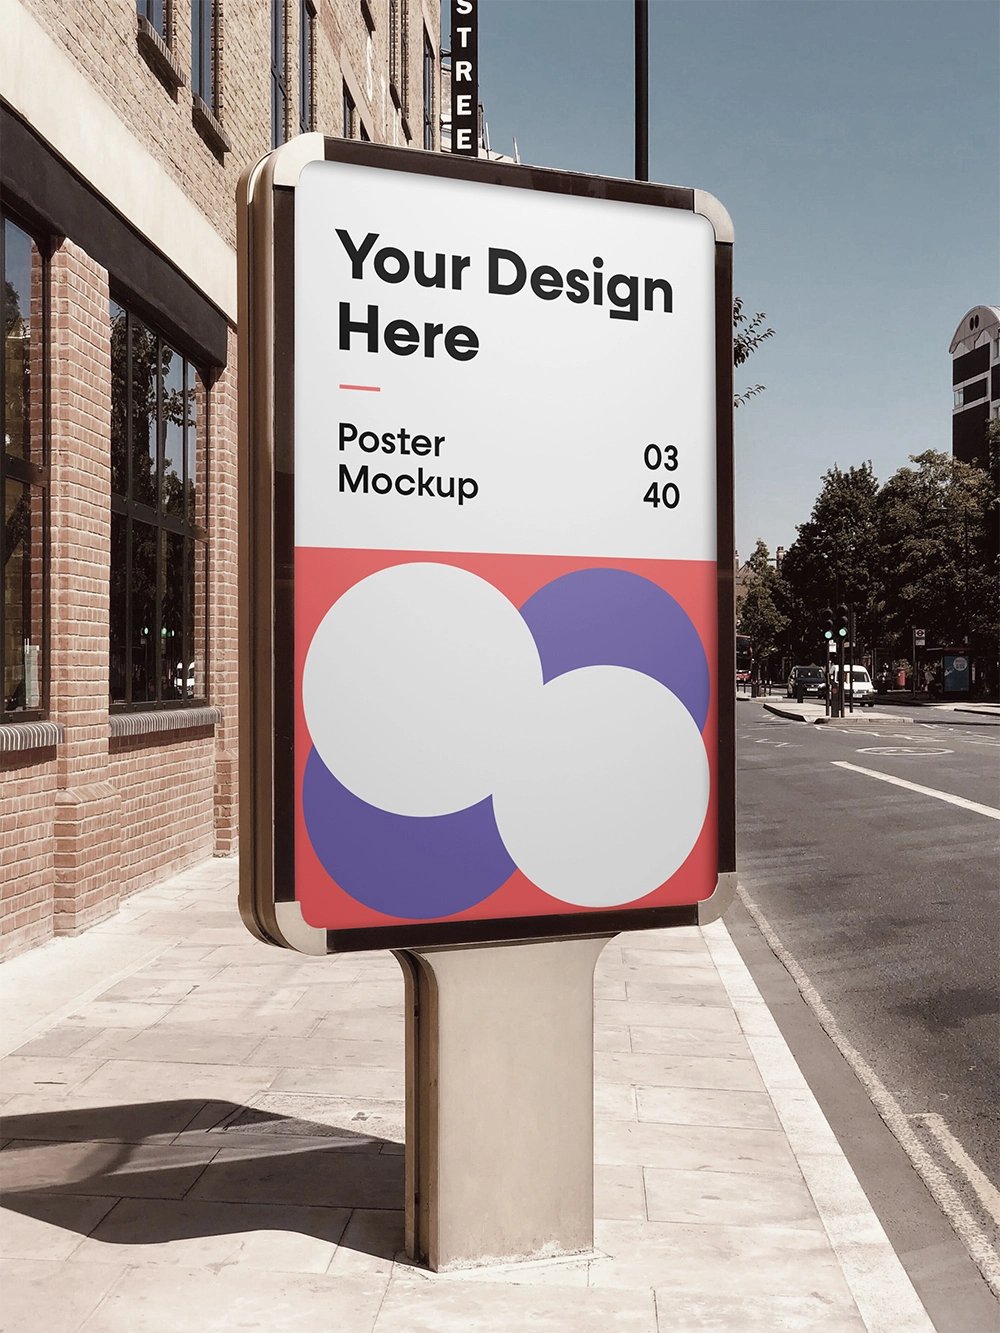 Outdoor City Poster Mockup - Free PSD